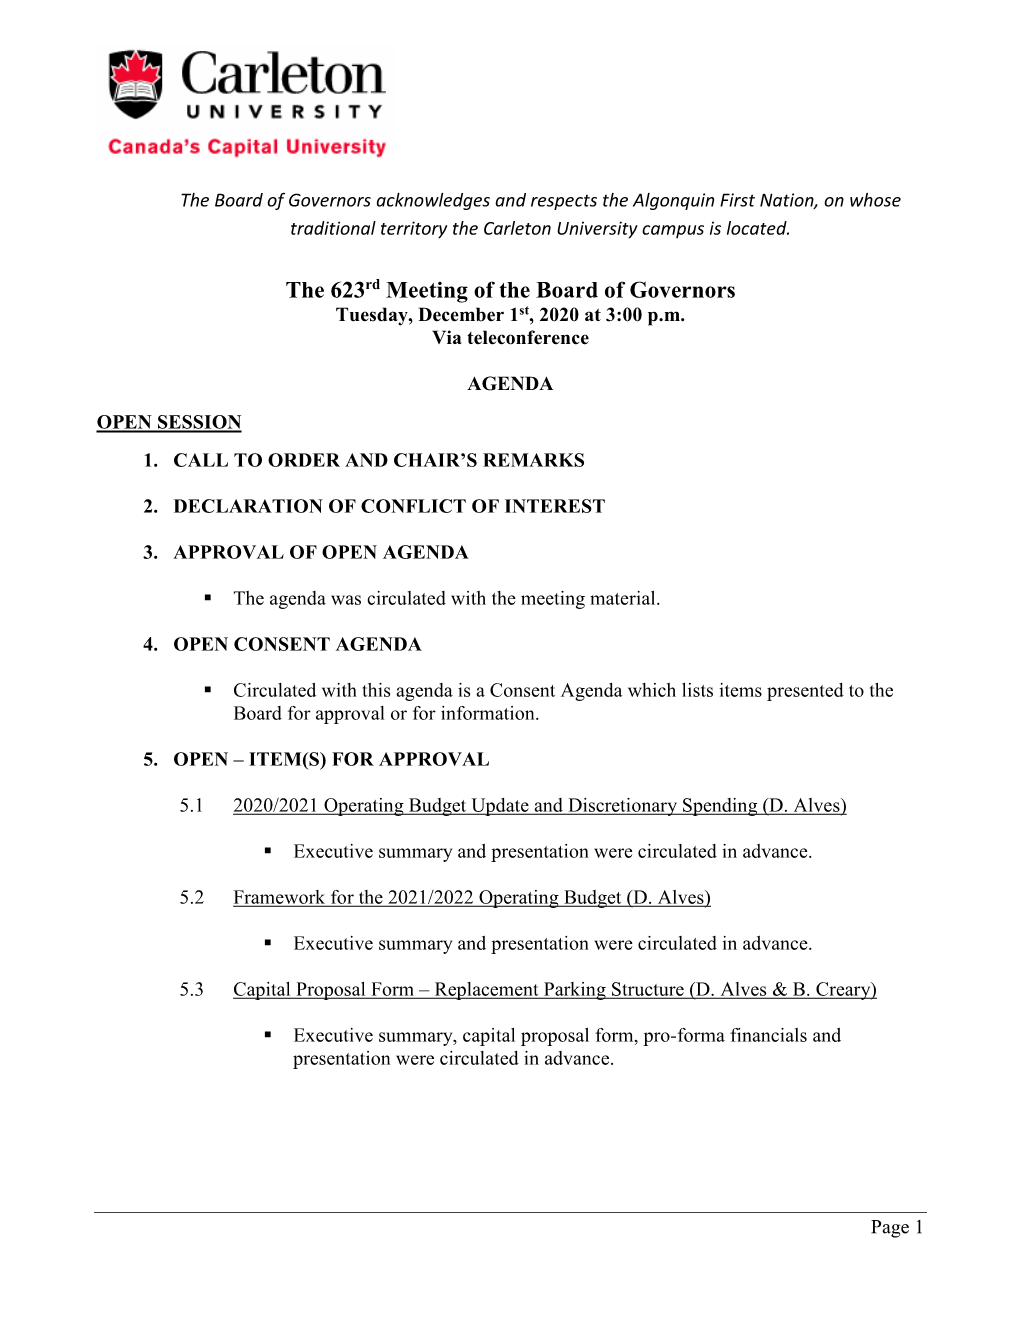 The 623Rd Meeting of the Board of Governors Tuesday, December 1St, 2020 at 3:00 P.M